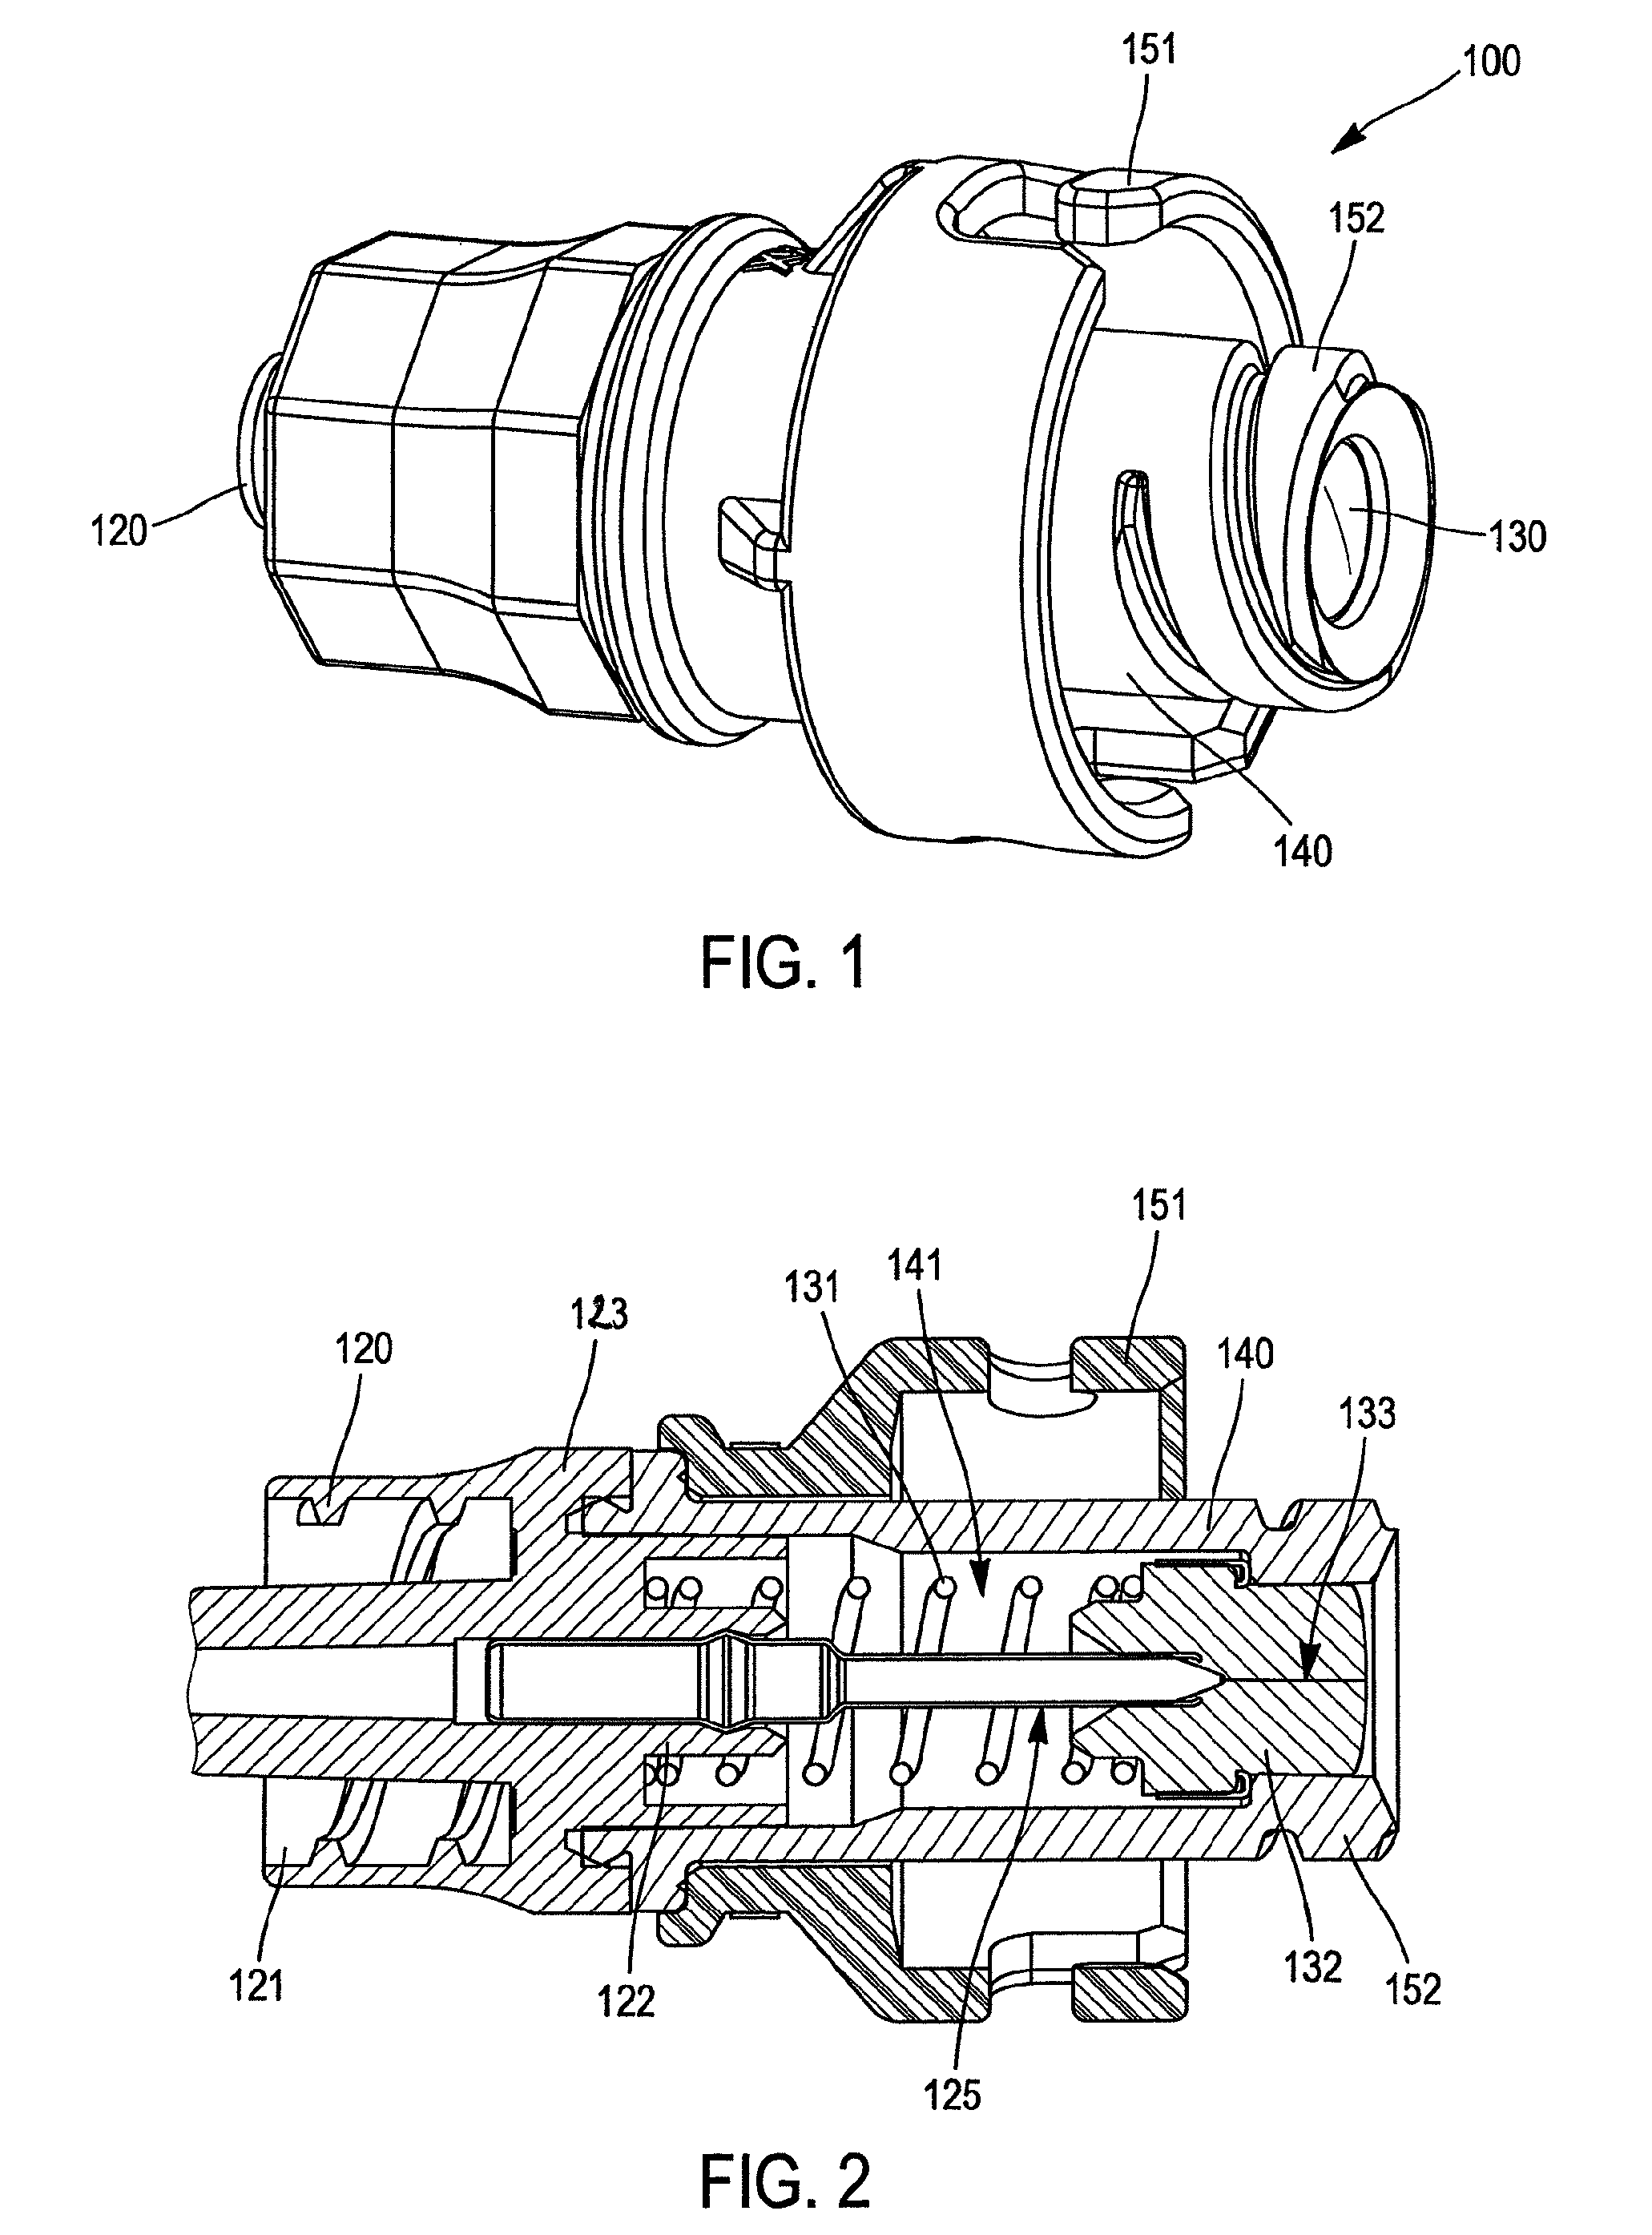 Non-drip, direct-flow connectors with secure locking